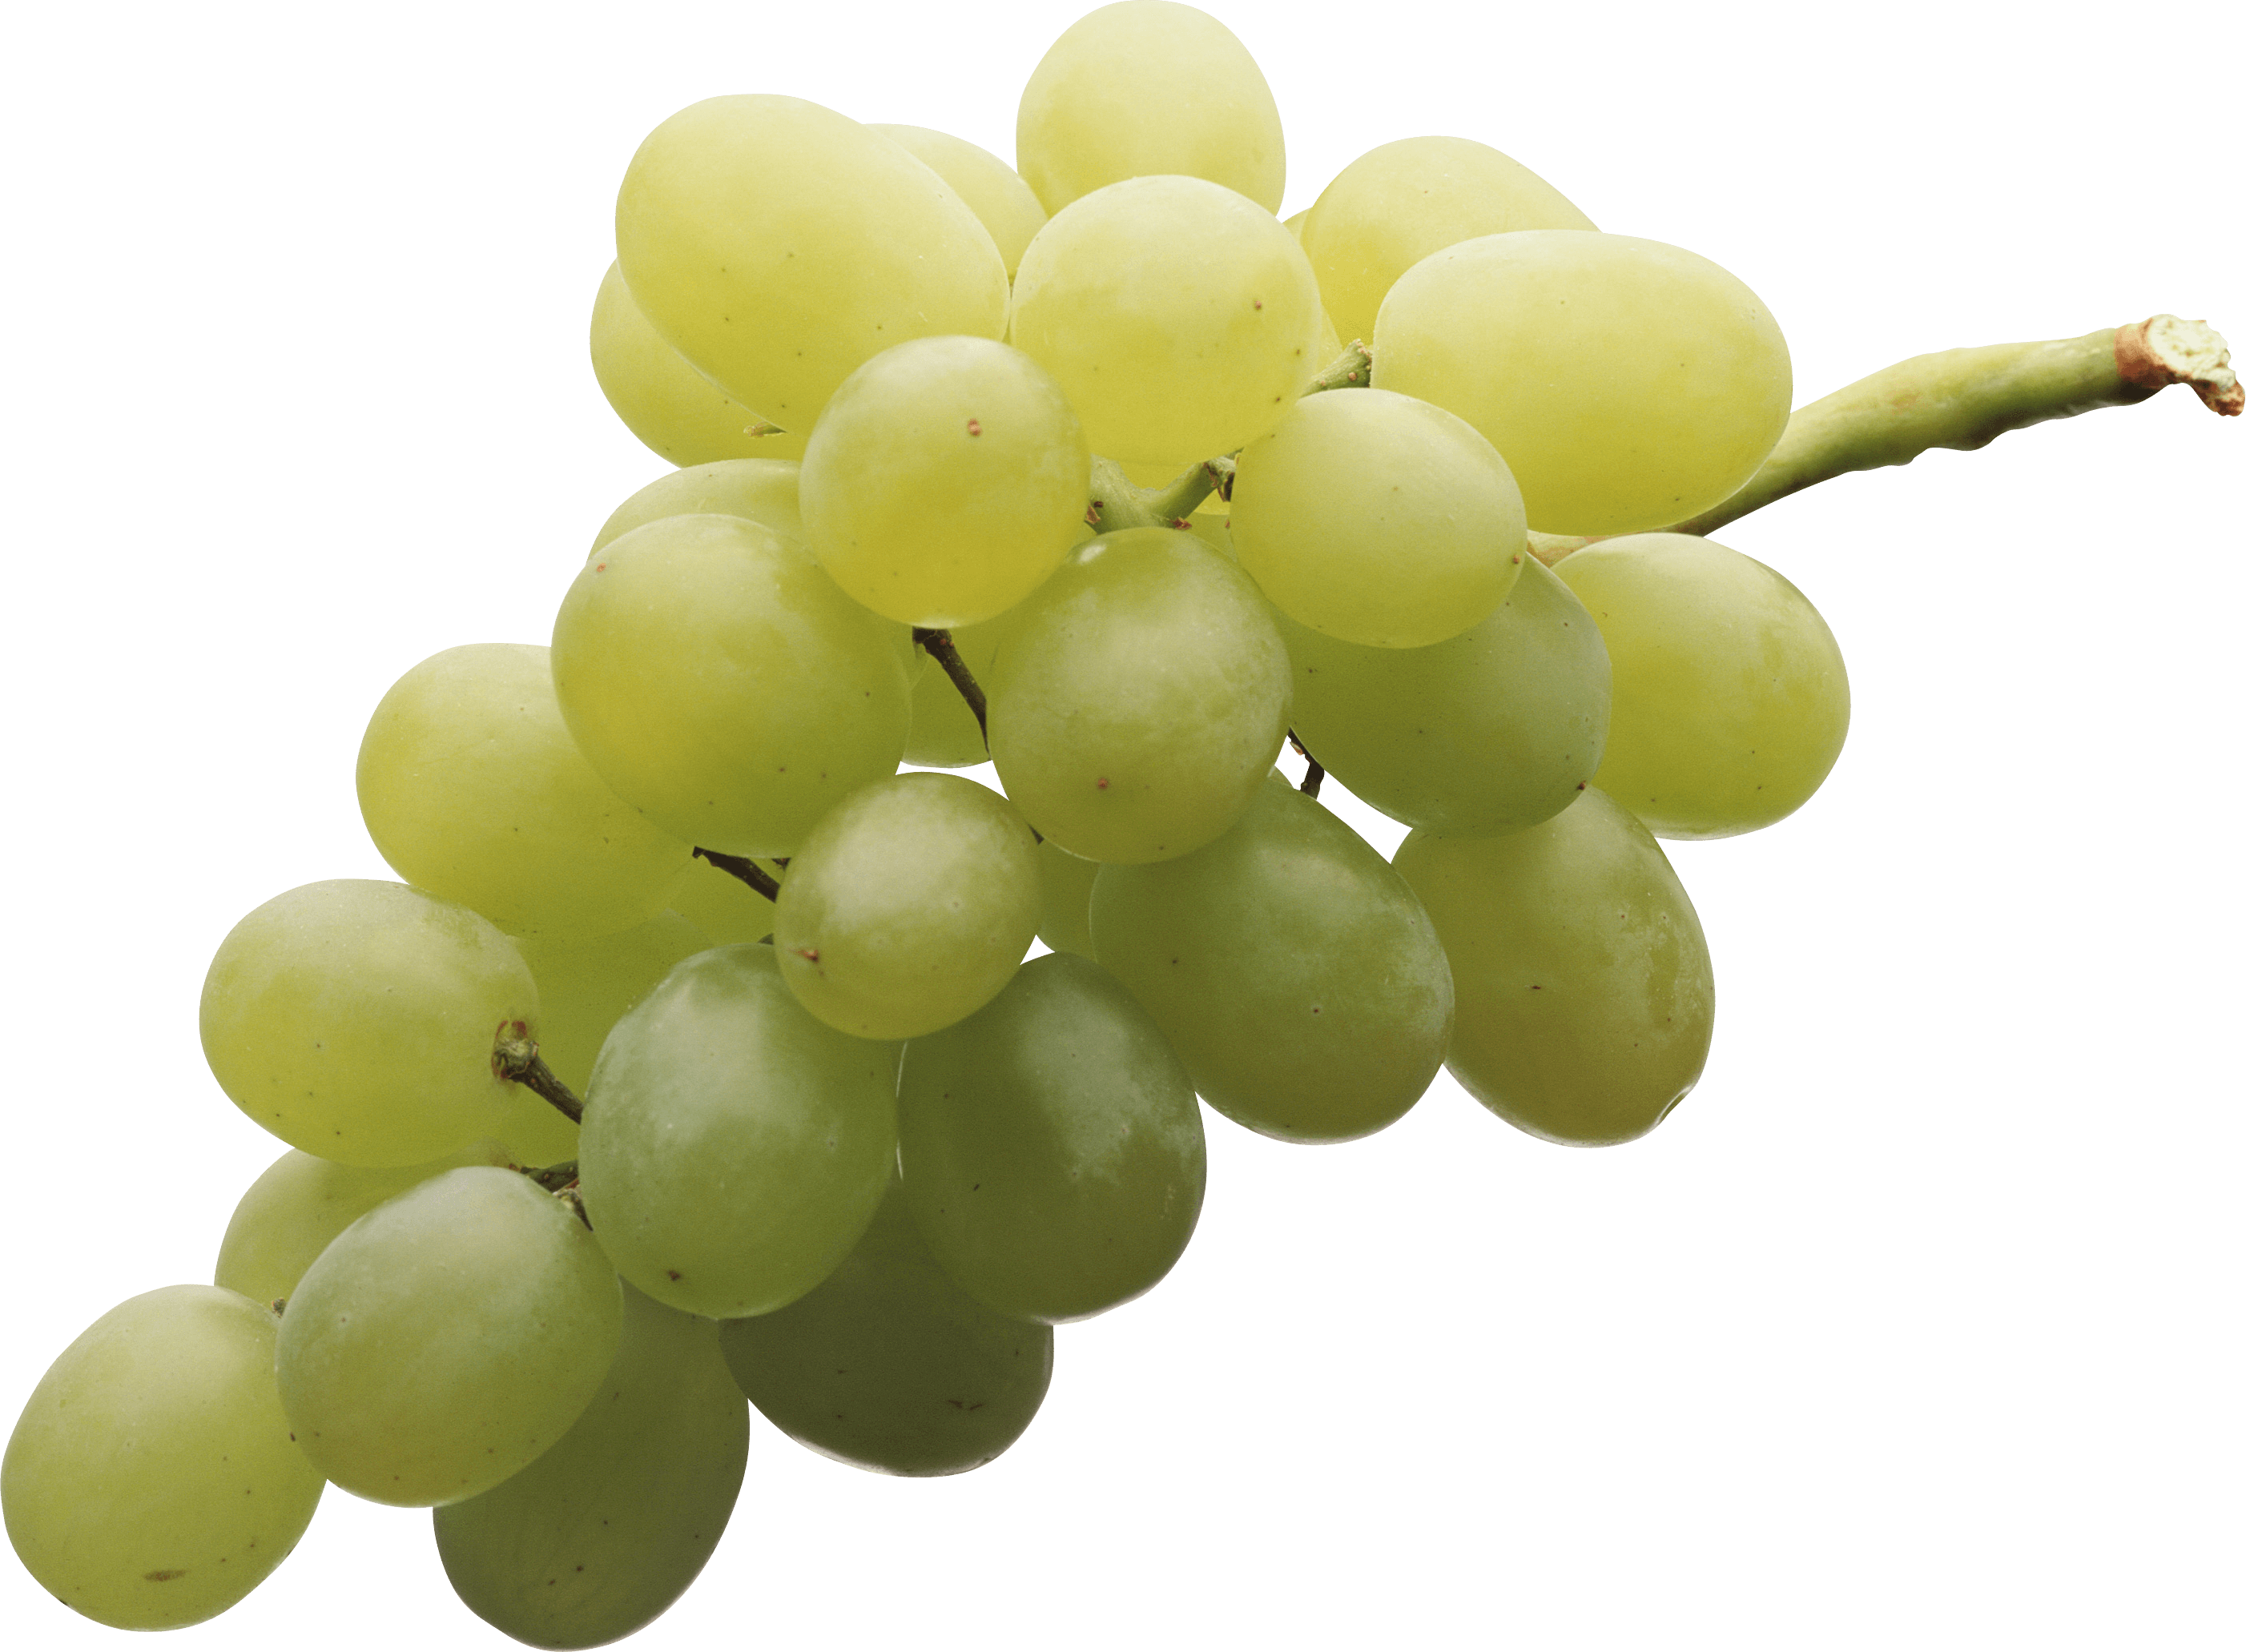 Grape Png Image Download Pict